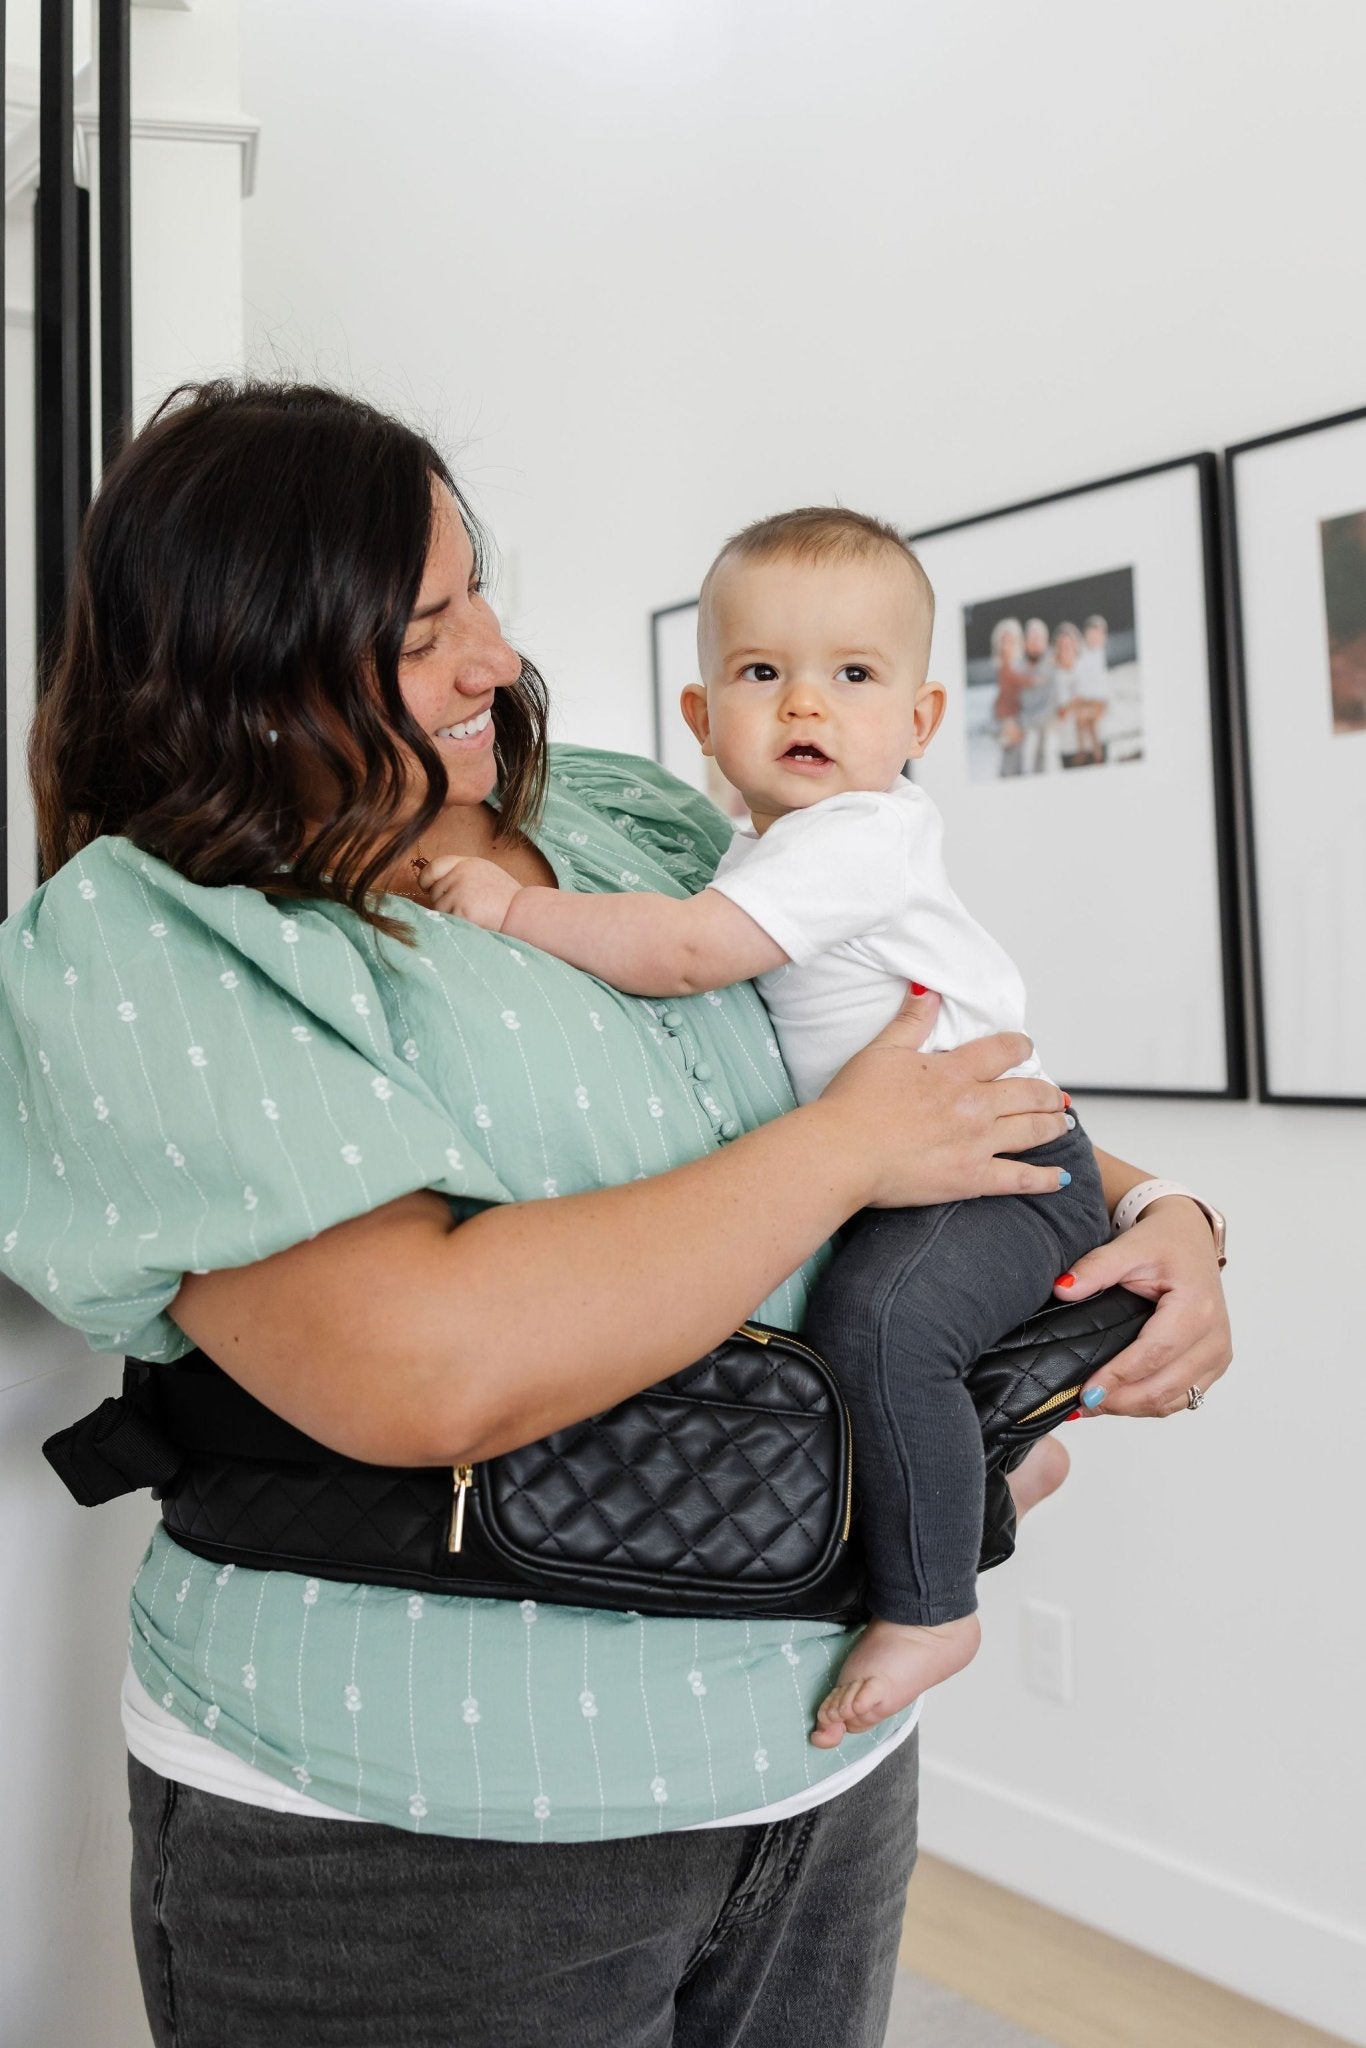 Tushbaby Hip Carrier - ANB Baby -850006525065$75 - $100